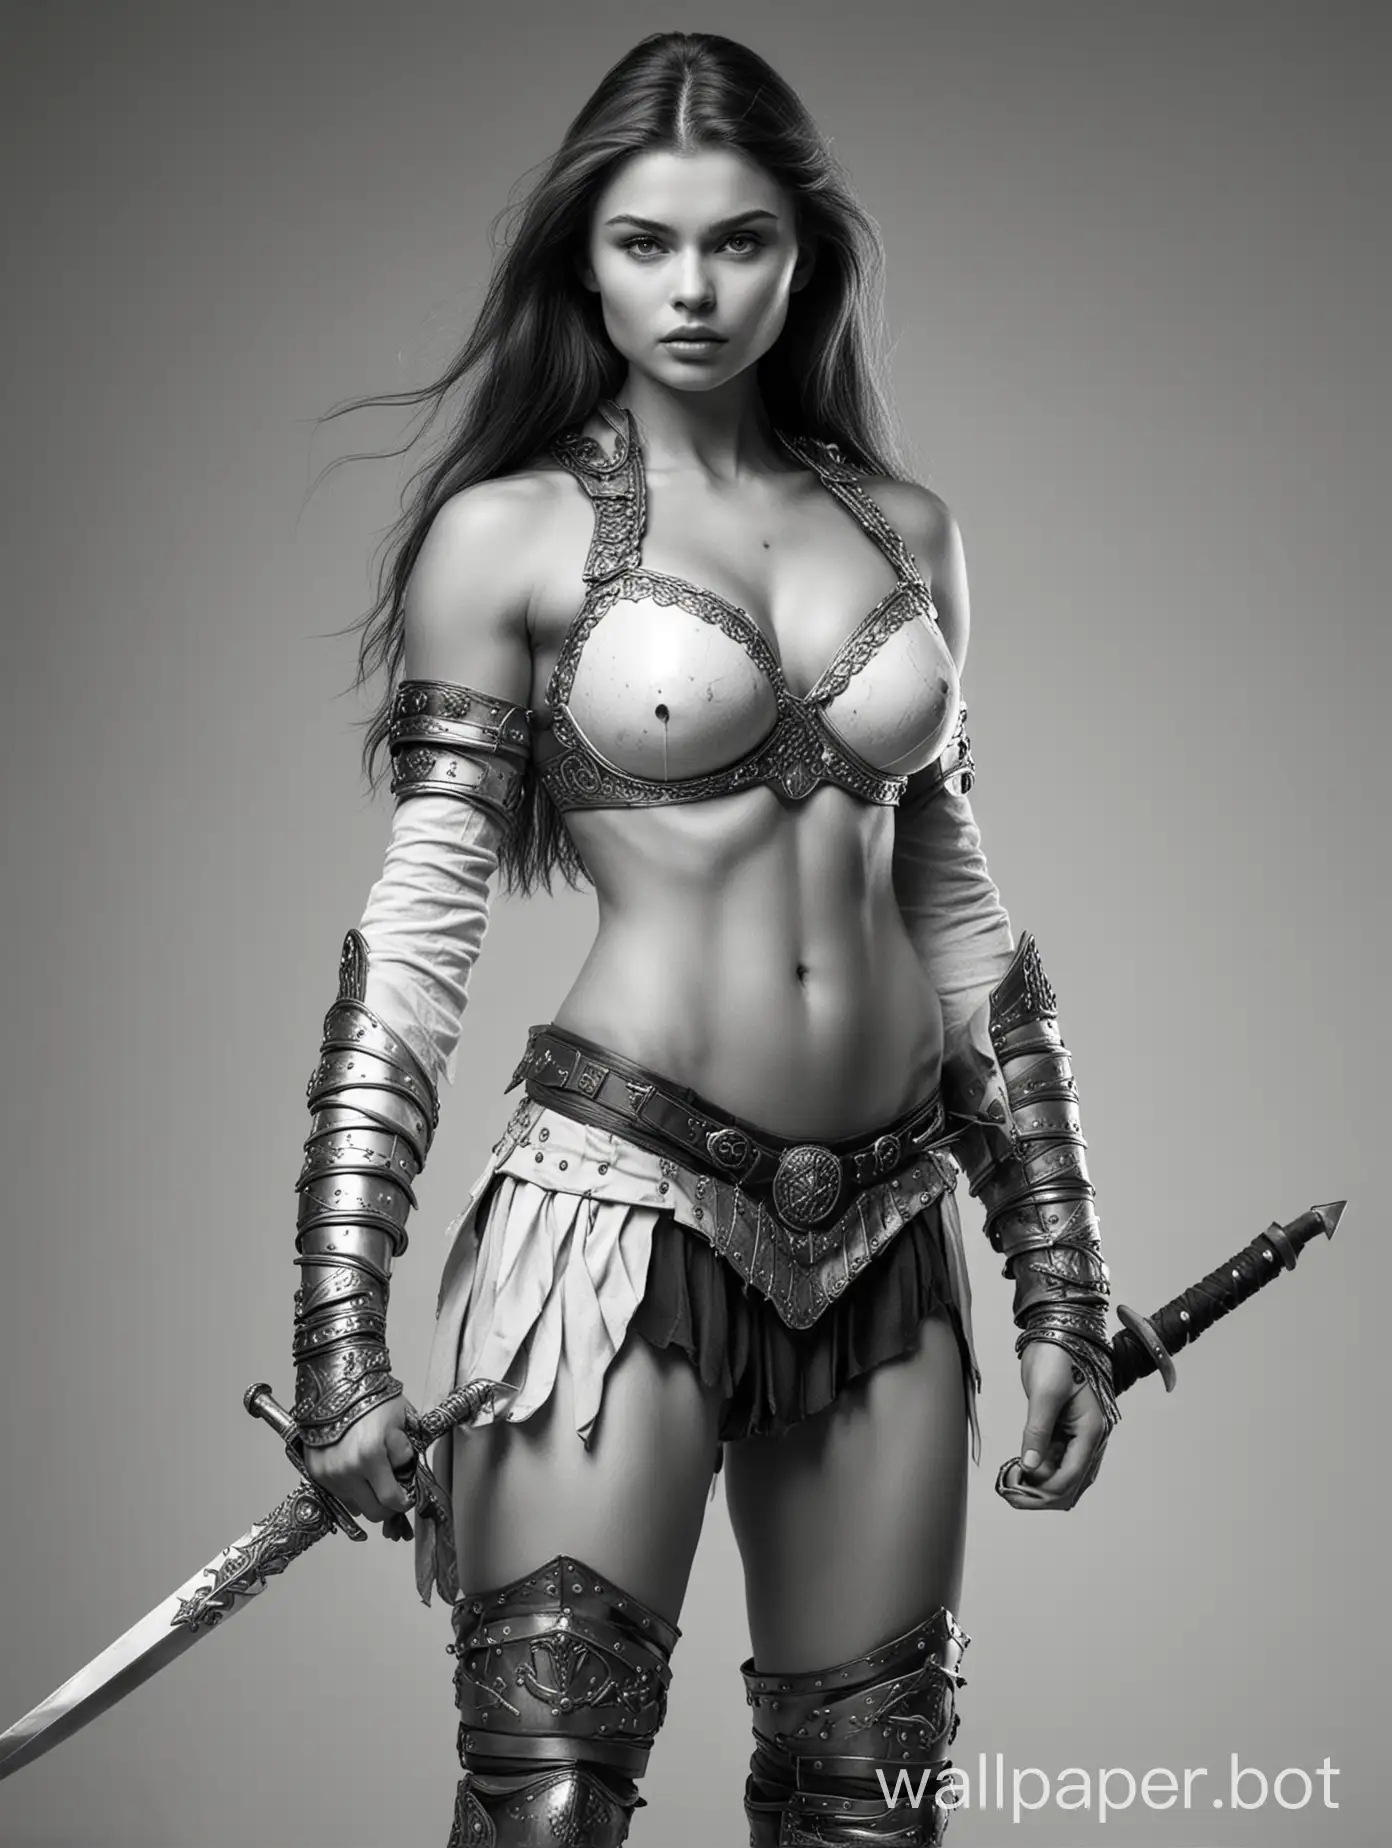 young Alina Kabaeva girl, dark long hair, big breasts 4 size, narrow waist, wide hips, white titanium armor of the northern barbarian marauder, deep neckline, shorts, sword, black and white sketch, white background, style nude fantasy